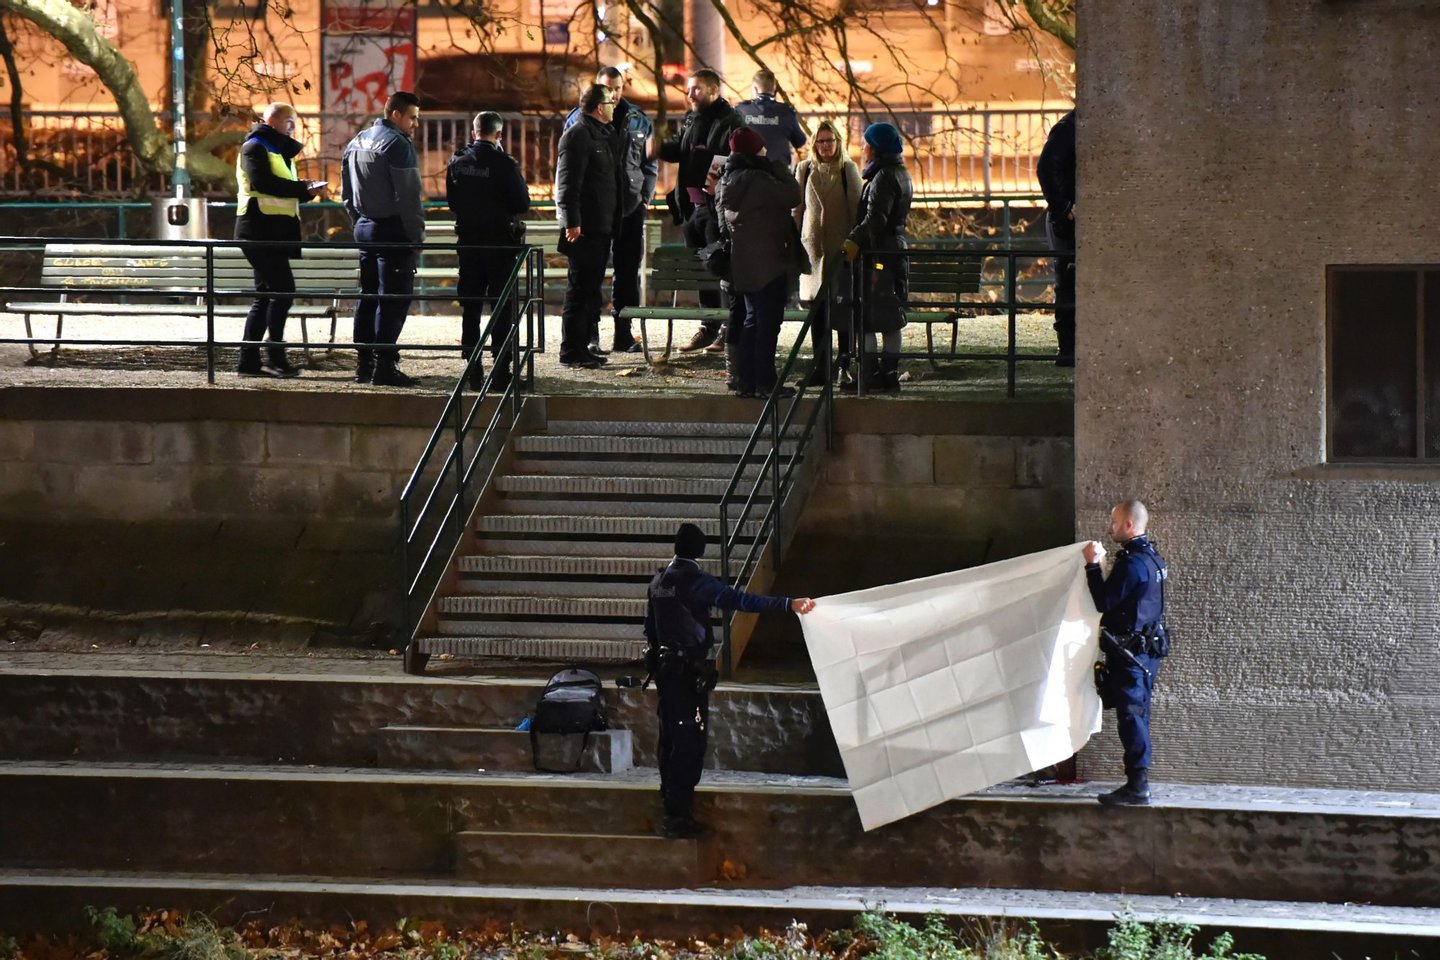 Swiss police officers hold a blanket to cover a dead body found near a Muslim prayer hall, central Zurich, on December 19, 2016, after three people were injured by gunfire. Local media reported the incident occurred in the Muslim prayer hall near the city's railway station. Swiss media said the three wounded people, all adults, were found in the street where the prayer hall is located. The suspected assailant had fled the scene and police sealed off the area. / AFP / MICHAEL BUHOLZER (Photo credit should read MICHAEL BUHOLZER/AFP/Getty Images)